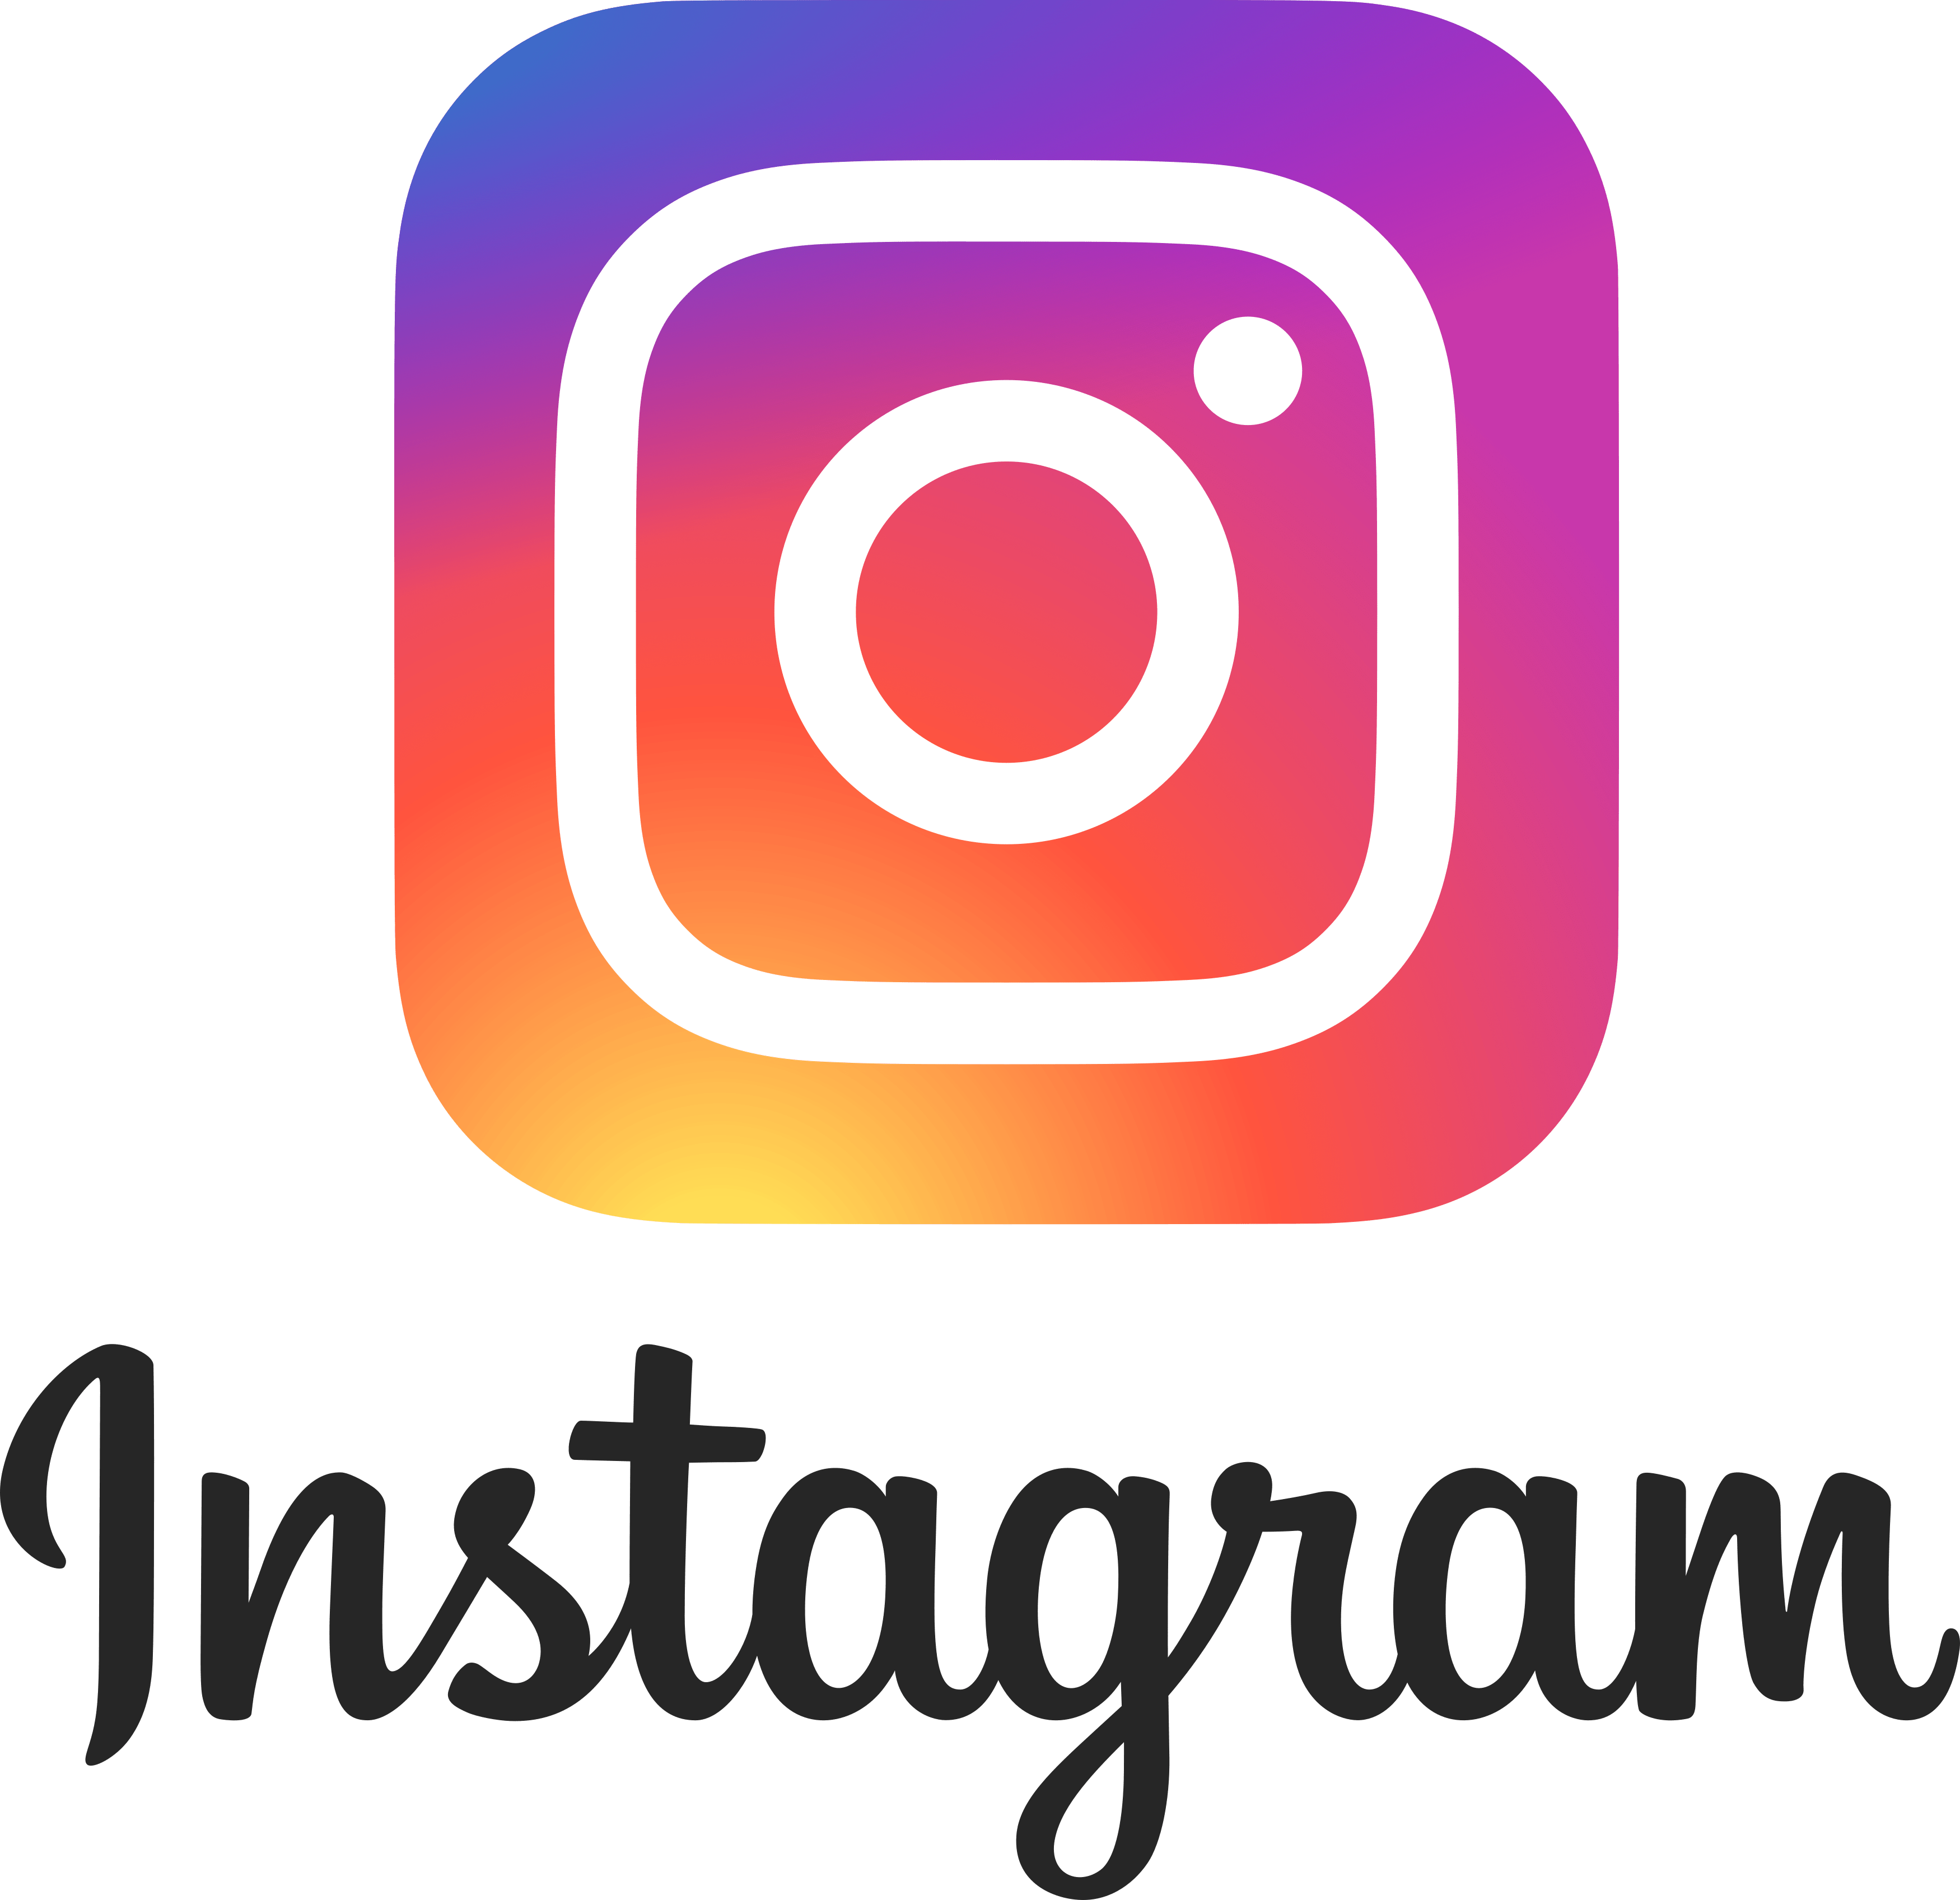 Instagram Logo Colorful Smooth Gradient Wave Background Wallpaper Editorial  Stock Image - Image of button, frame: 117793629